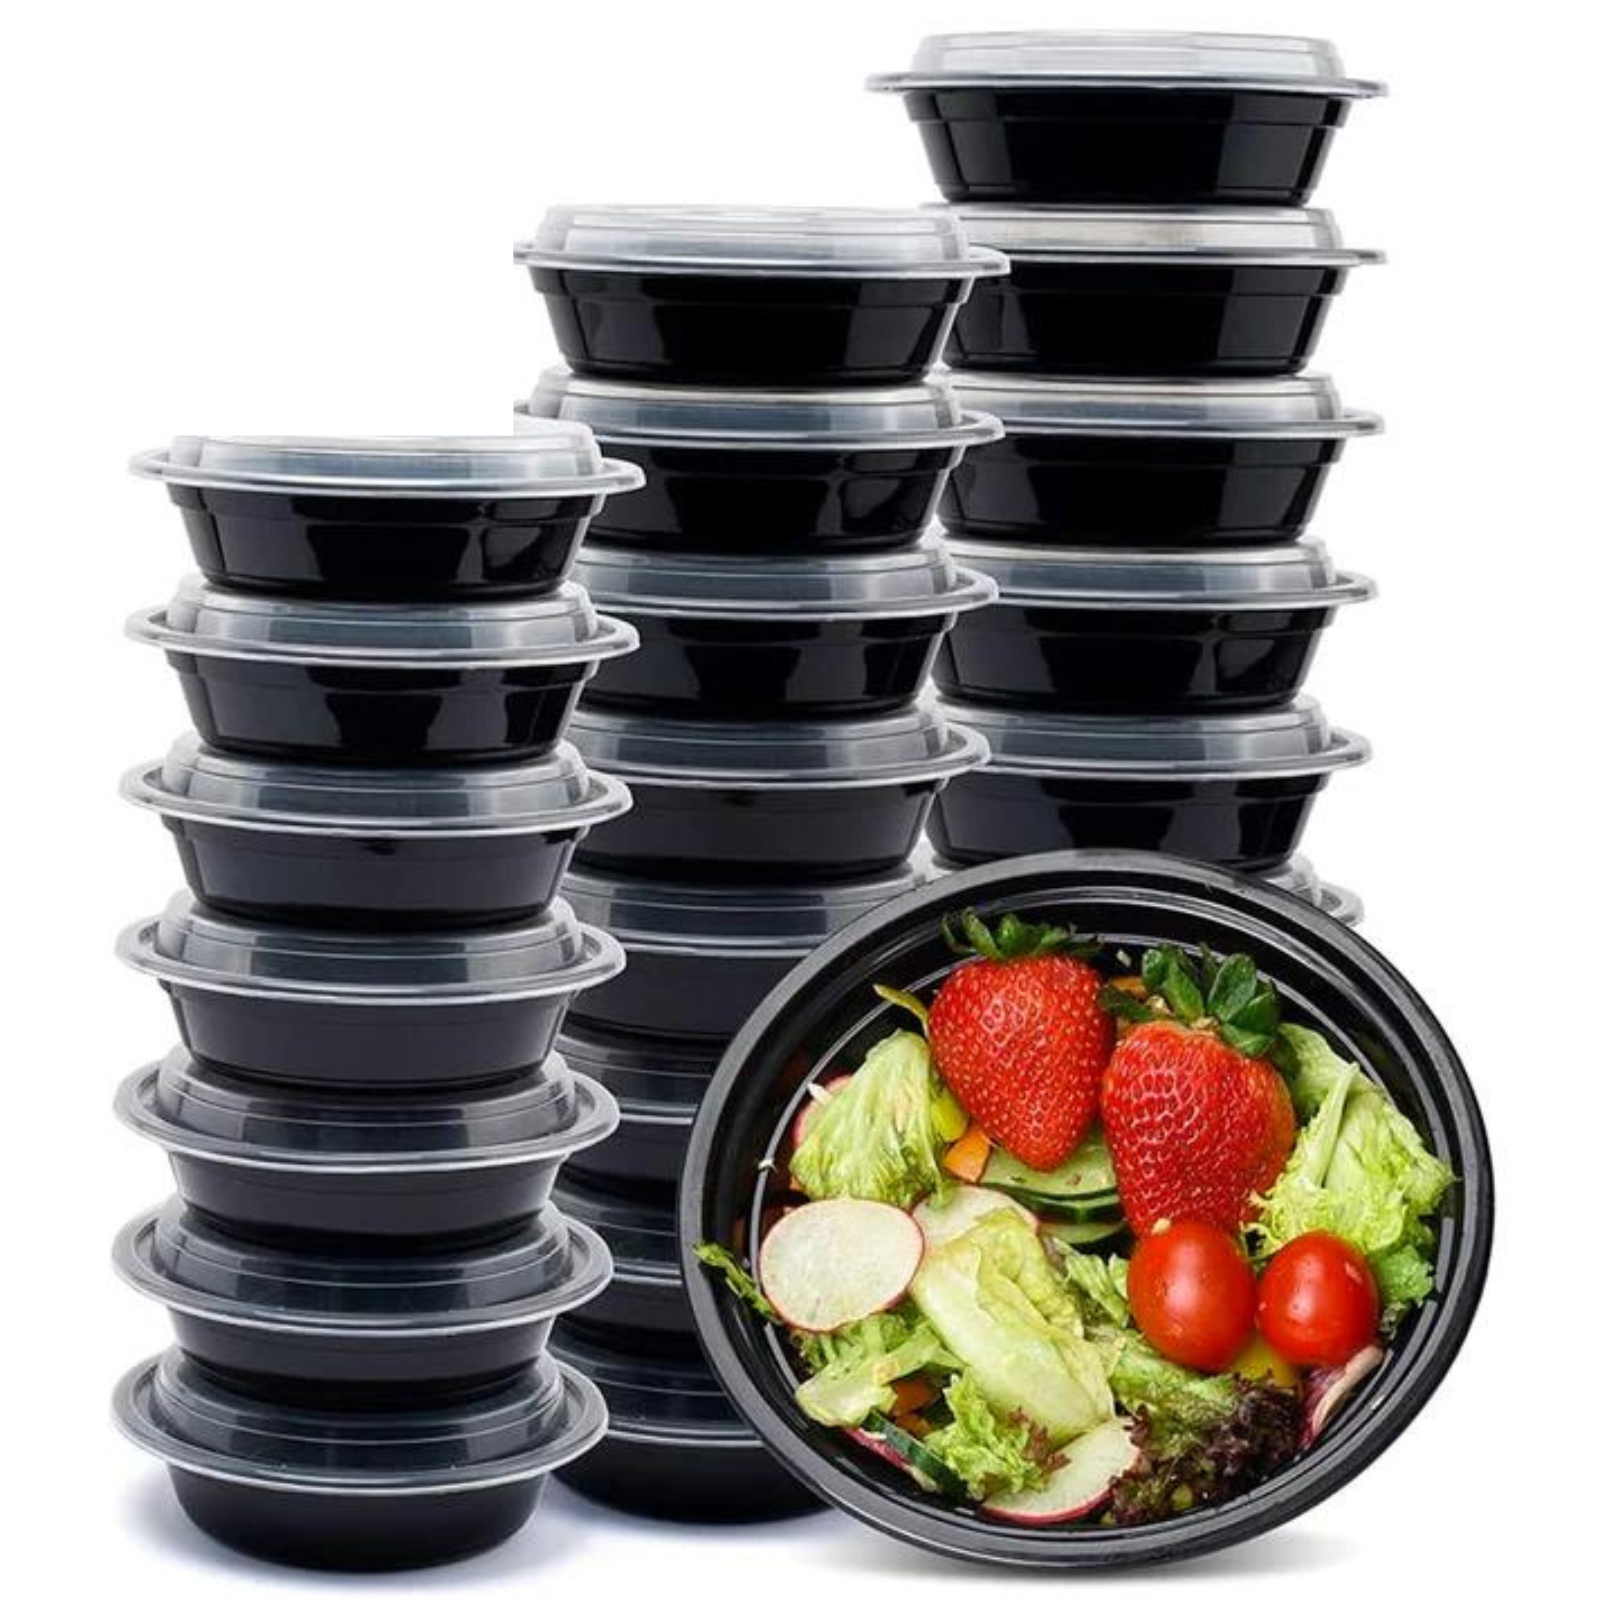 *WHOLESALE*  16oz Black Meal Prep/ Bento Box Container with Clear Lid |150ct/Case Food Storage & Serving VeZee   